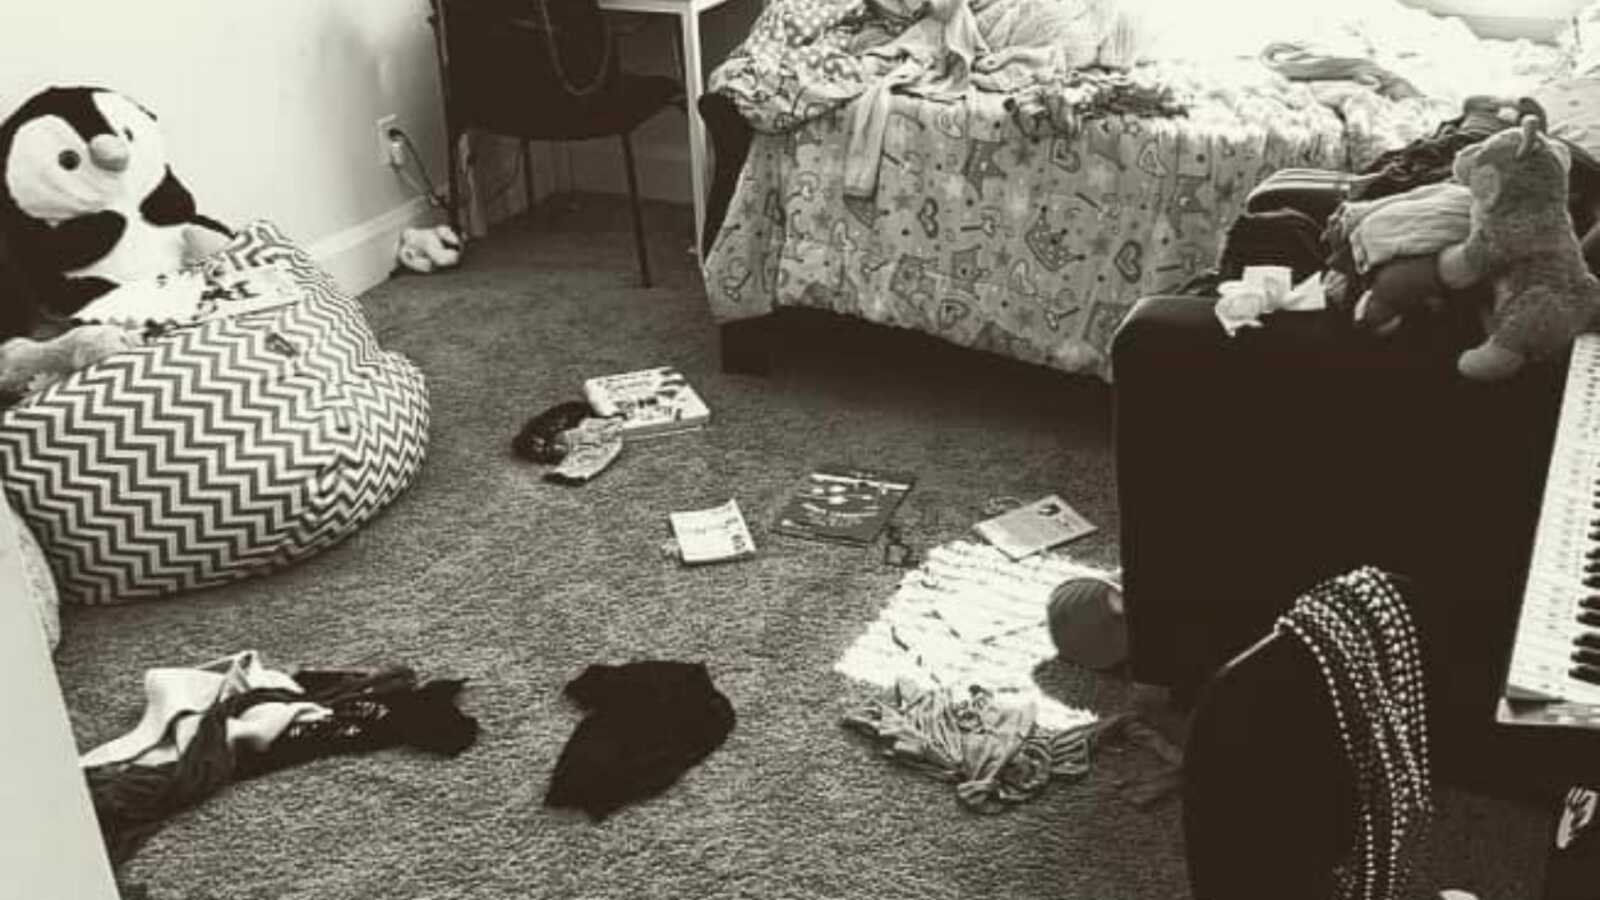 kid's messy room that mom is okay with